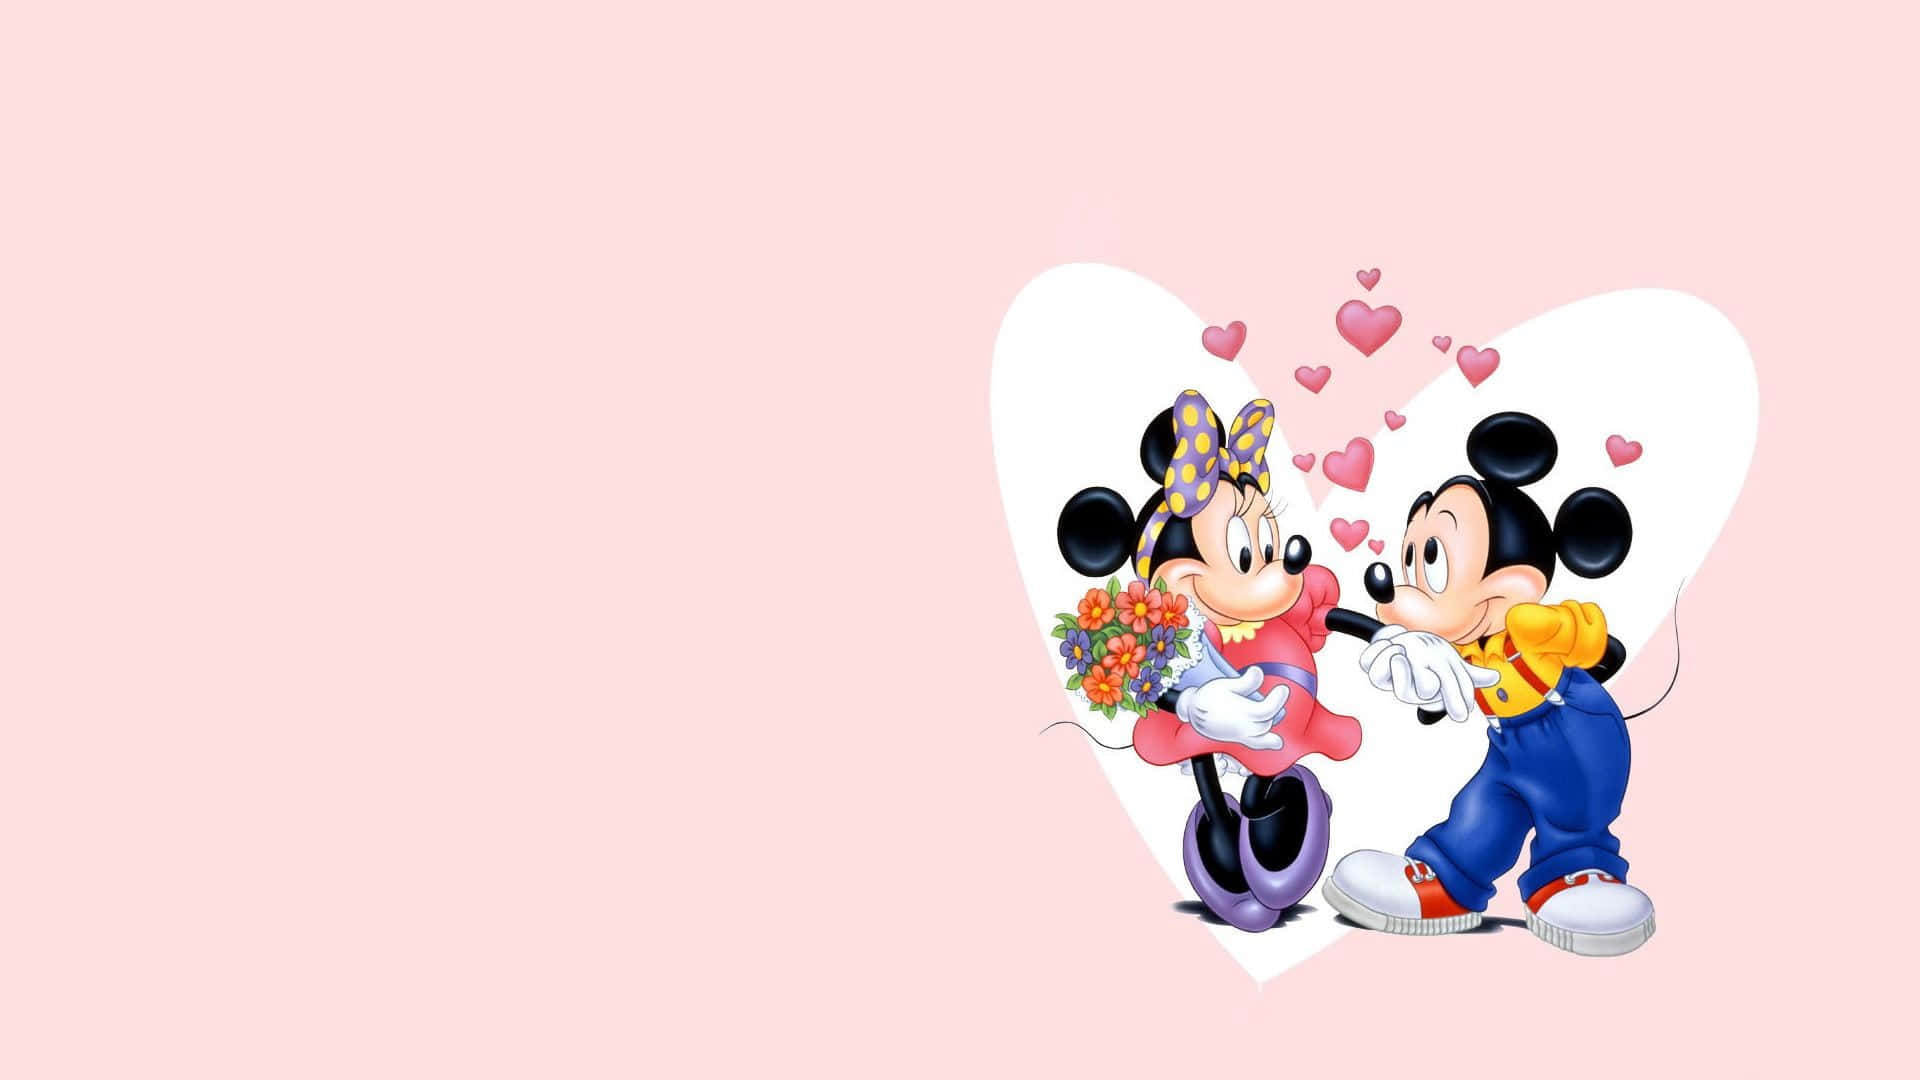 Enjoy the Fun with Minnie Mouse